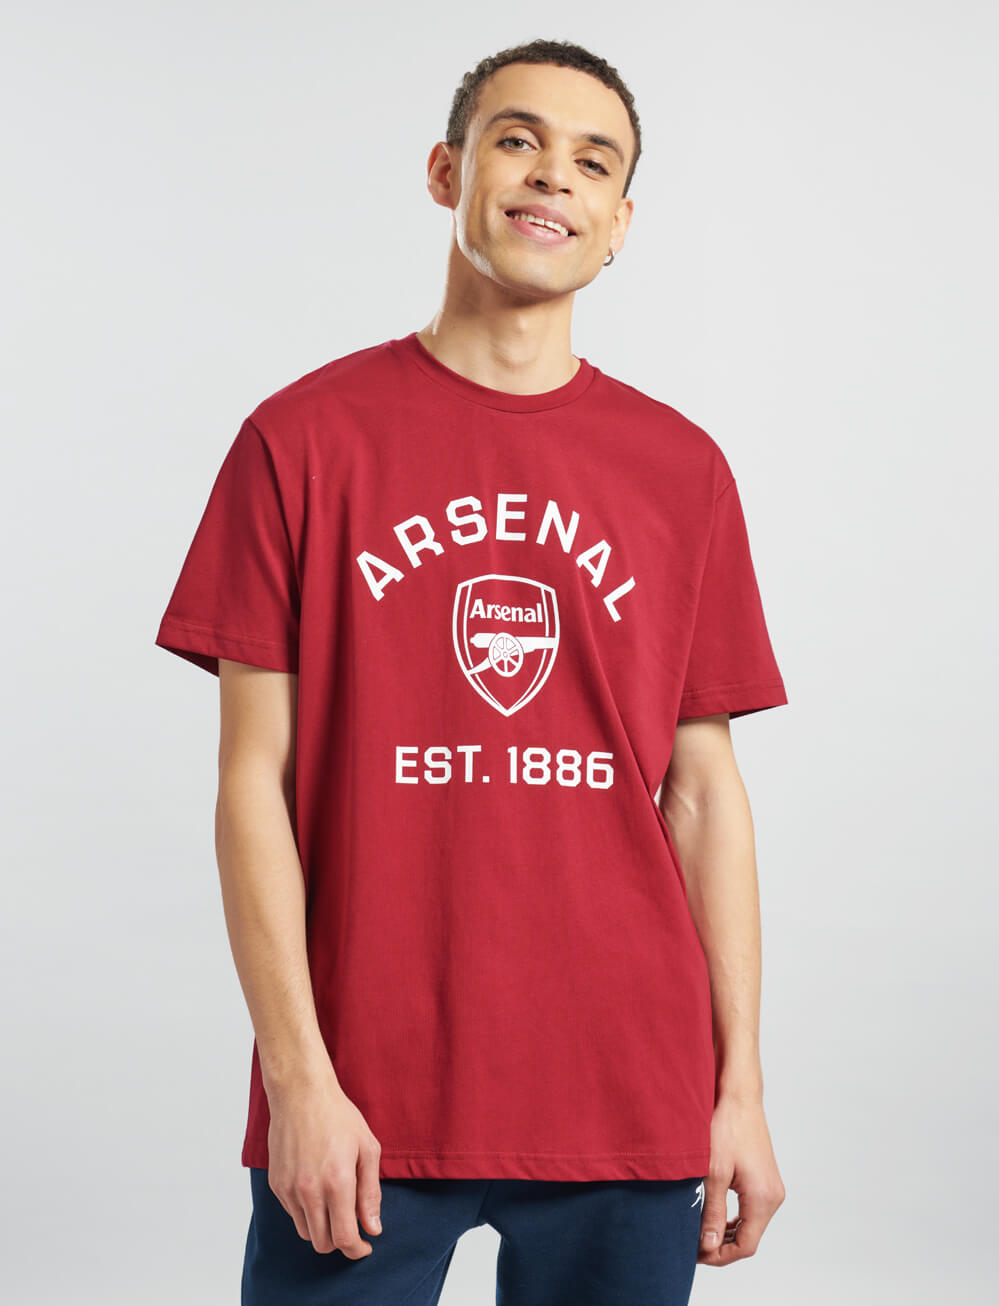 Official Arsenal Graphic T-Shirt - Red - The World Football Store